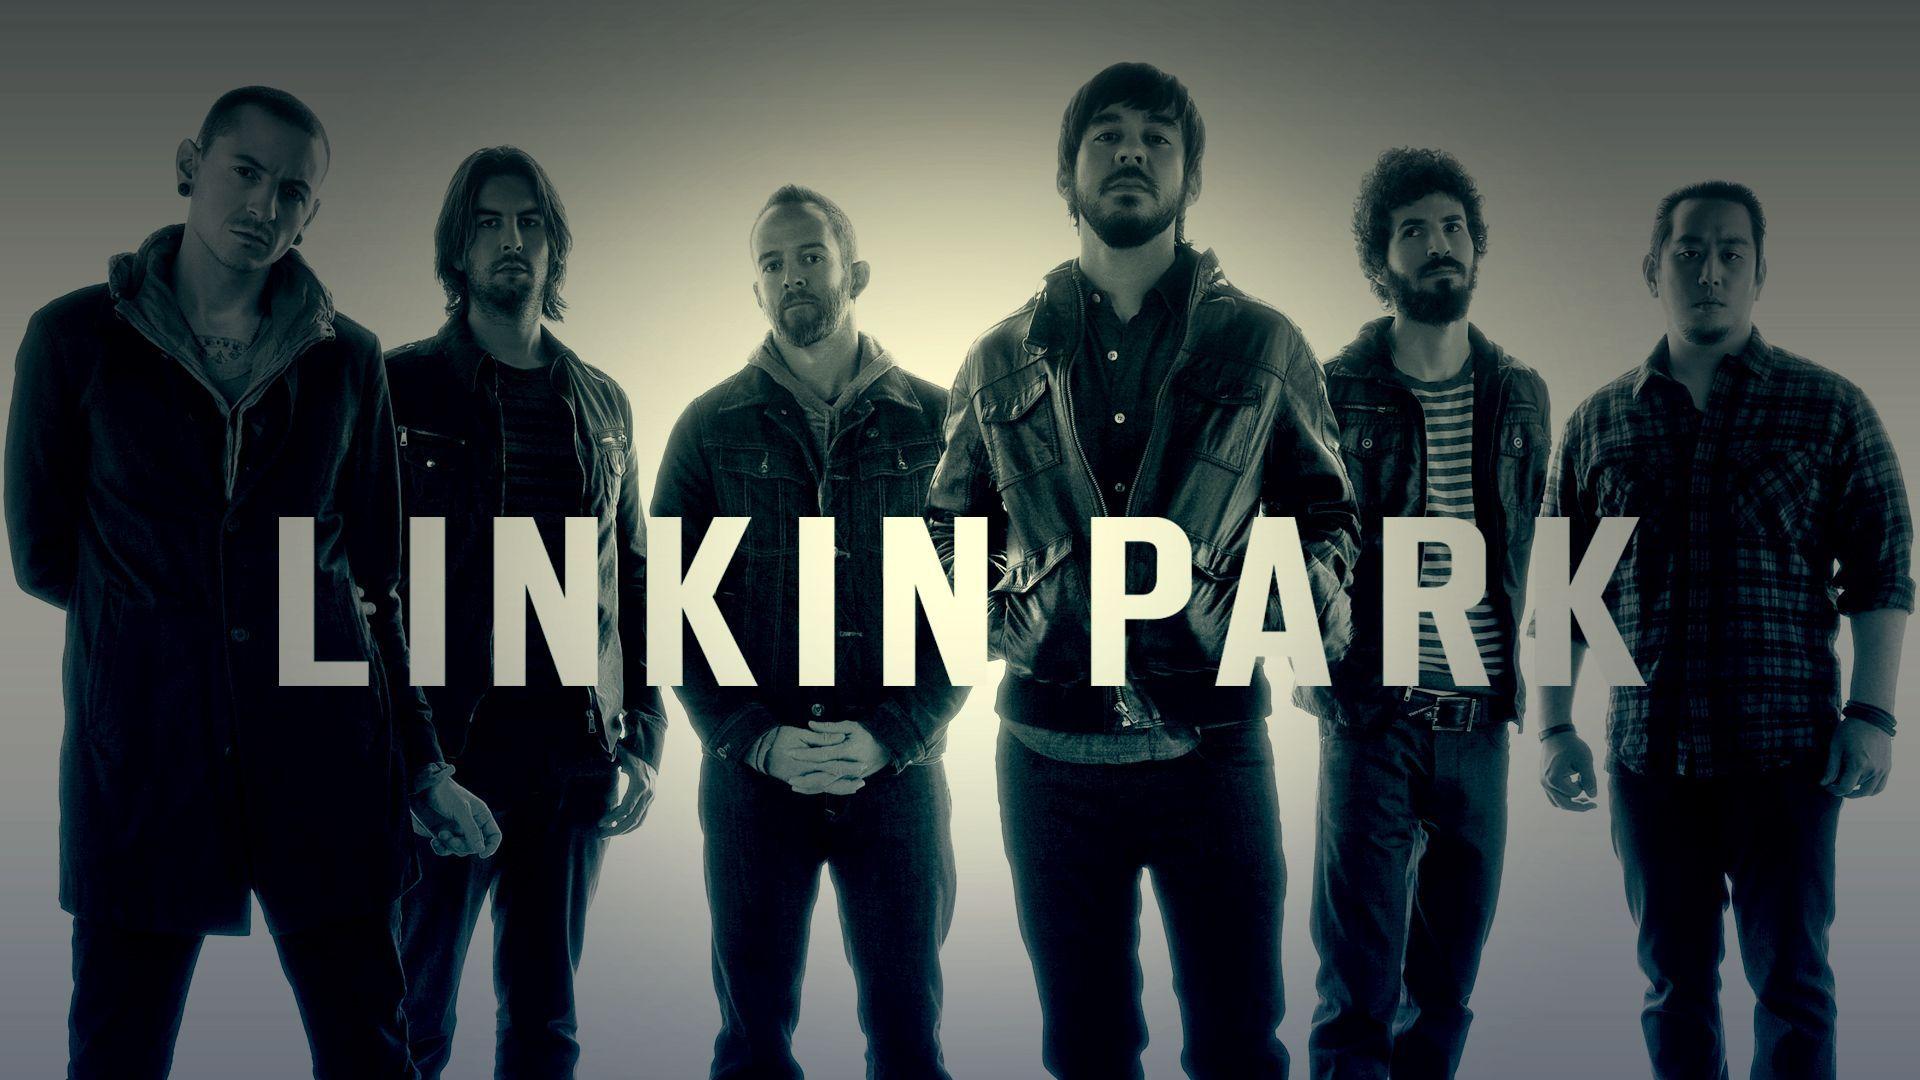 Win 2 tickets for Linkin Park concert in Rome • Wanted in Rome